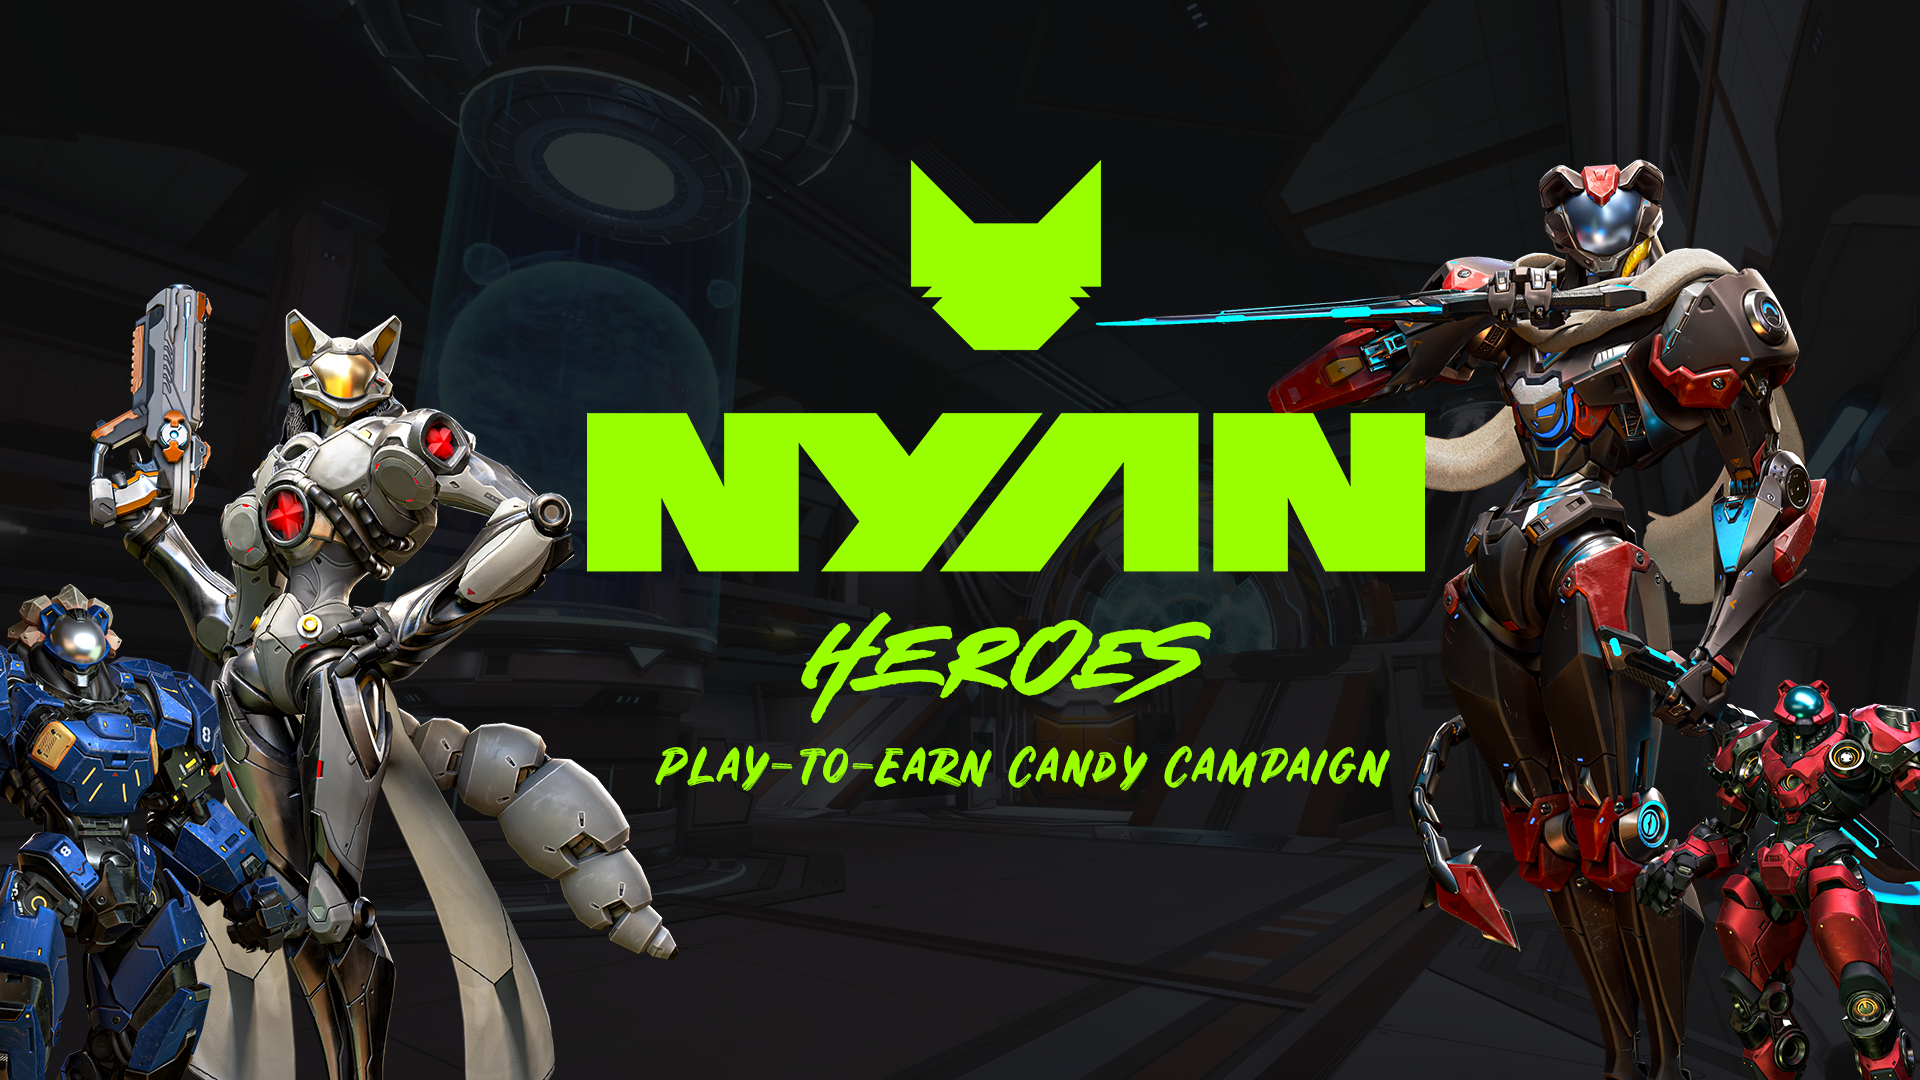 Nyan Heroes Play-to-Earn Candy Campaign